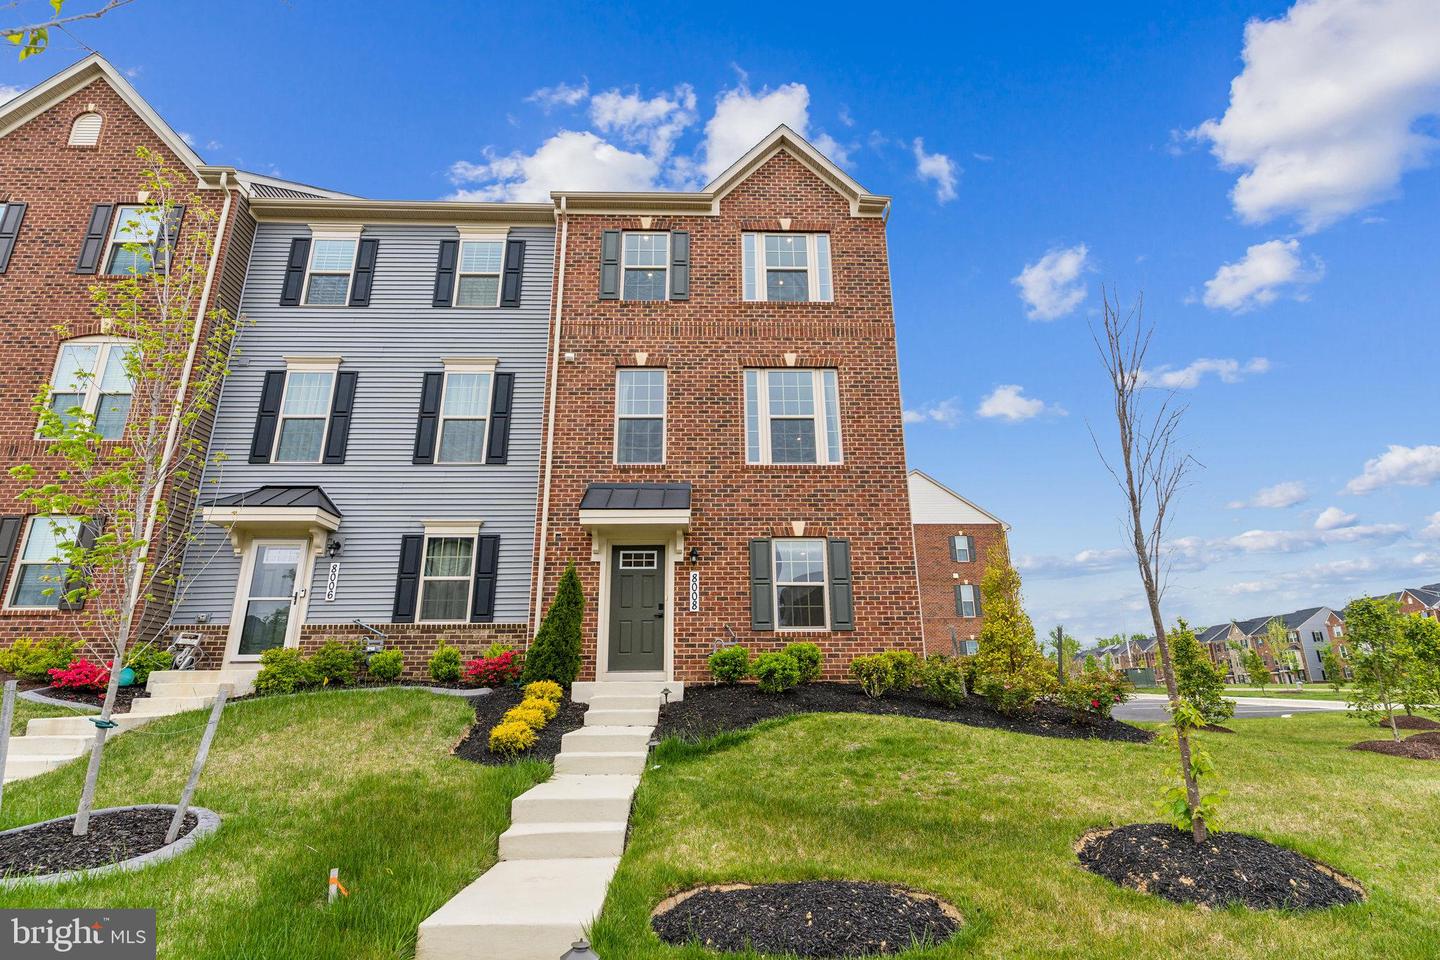 View Brandywine, MD 20613 townhome